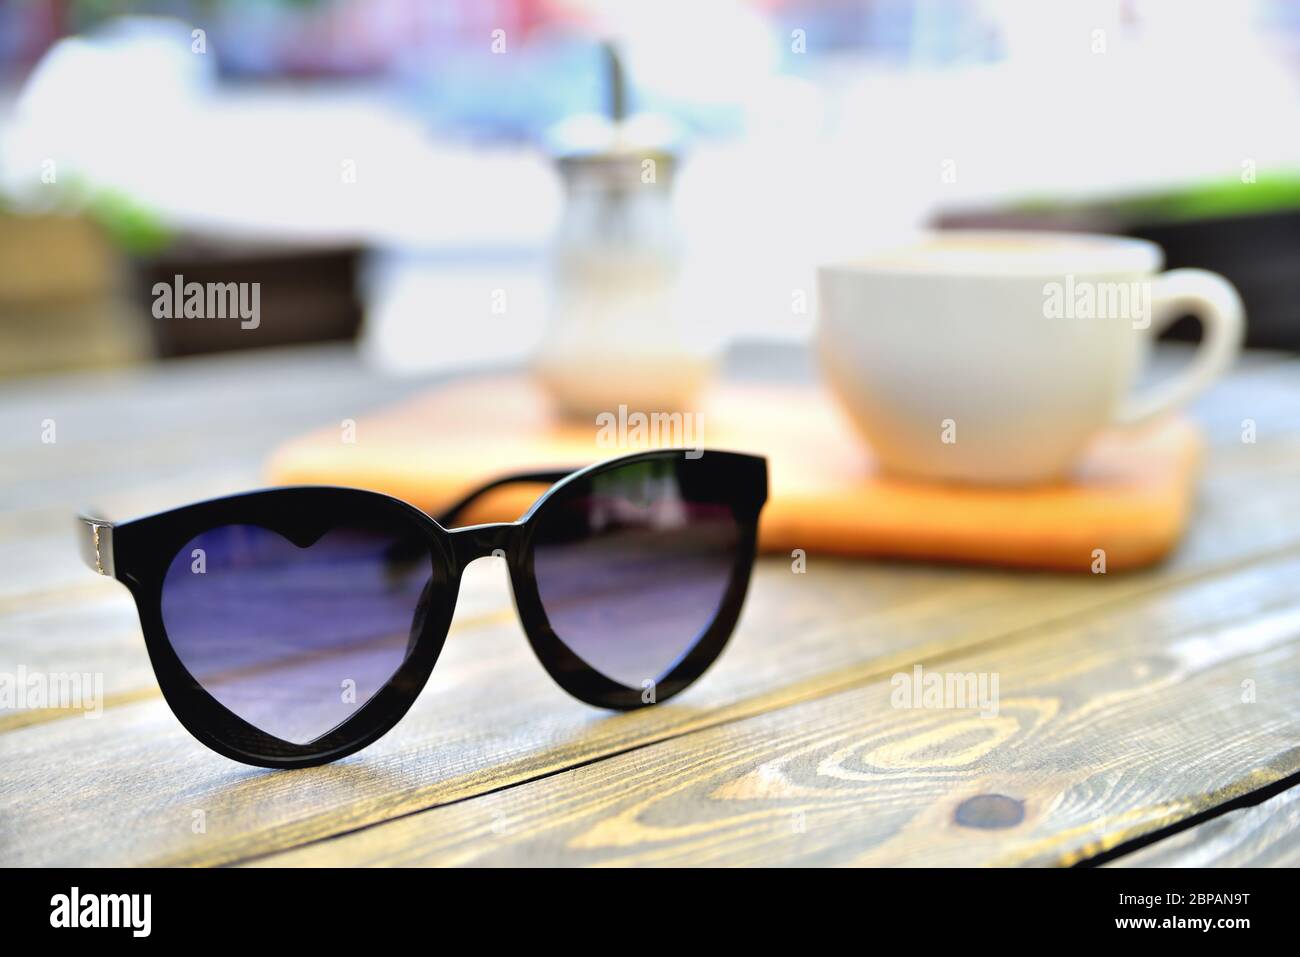 cup of coffee on a wooden stand is on the table in a cafe summer morning, sunglasses in the foreground, close-up Stock Photo